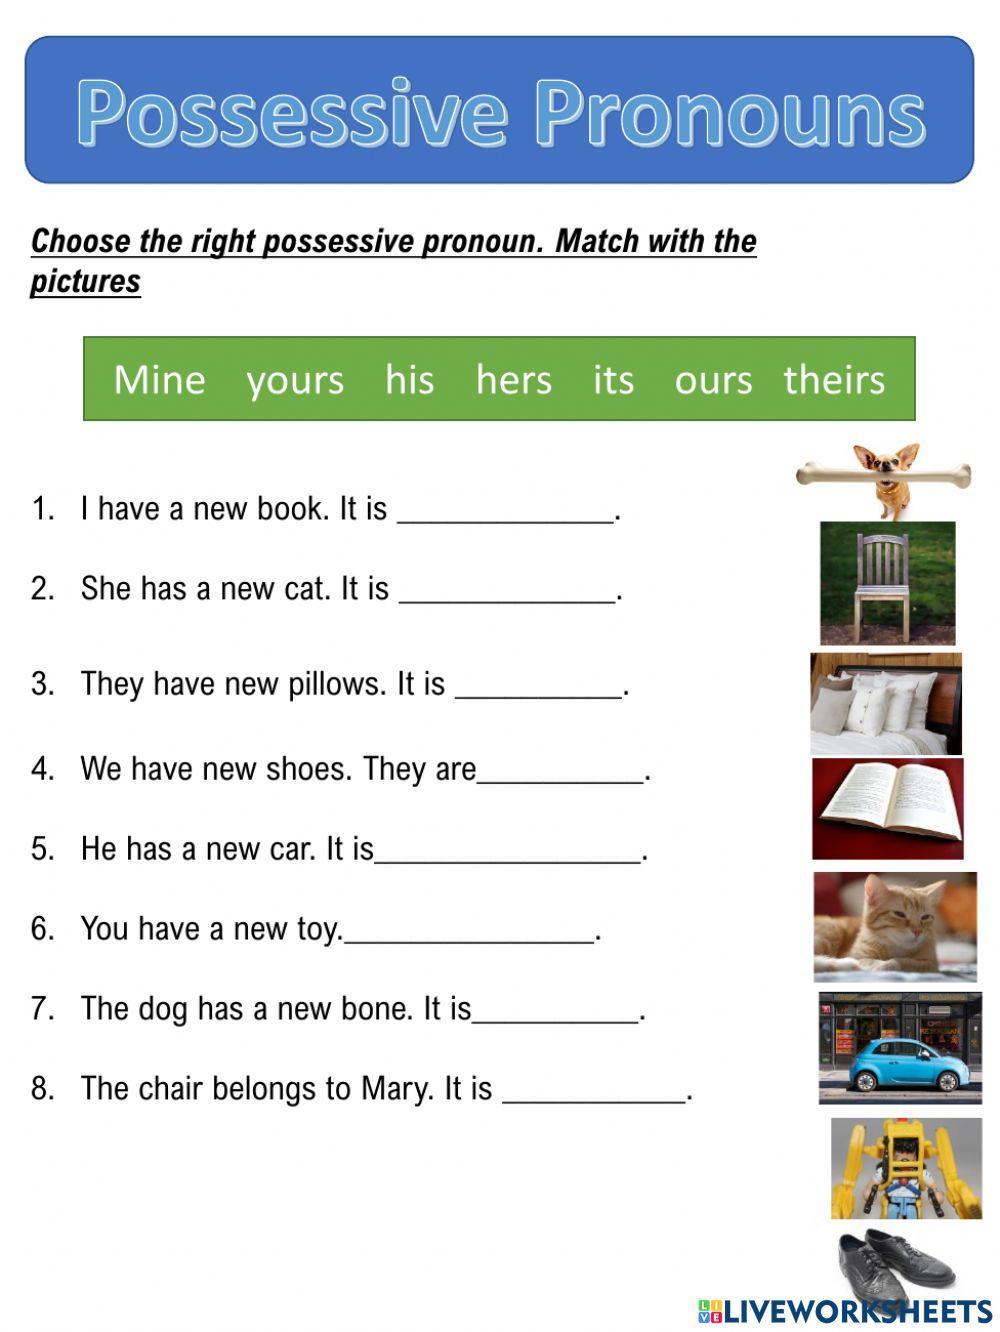 pronouns-interactive-and-downloadable-worksheet-you-can-do-the-exercises-online-or-download-the